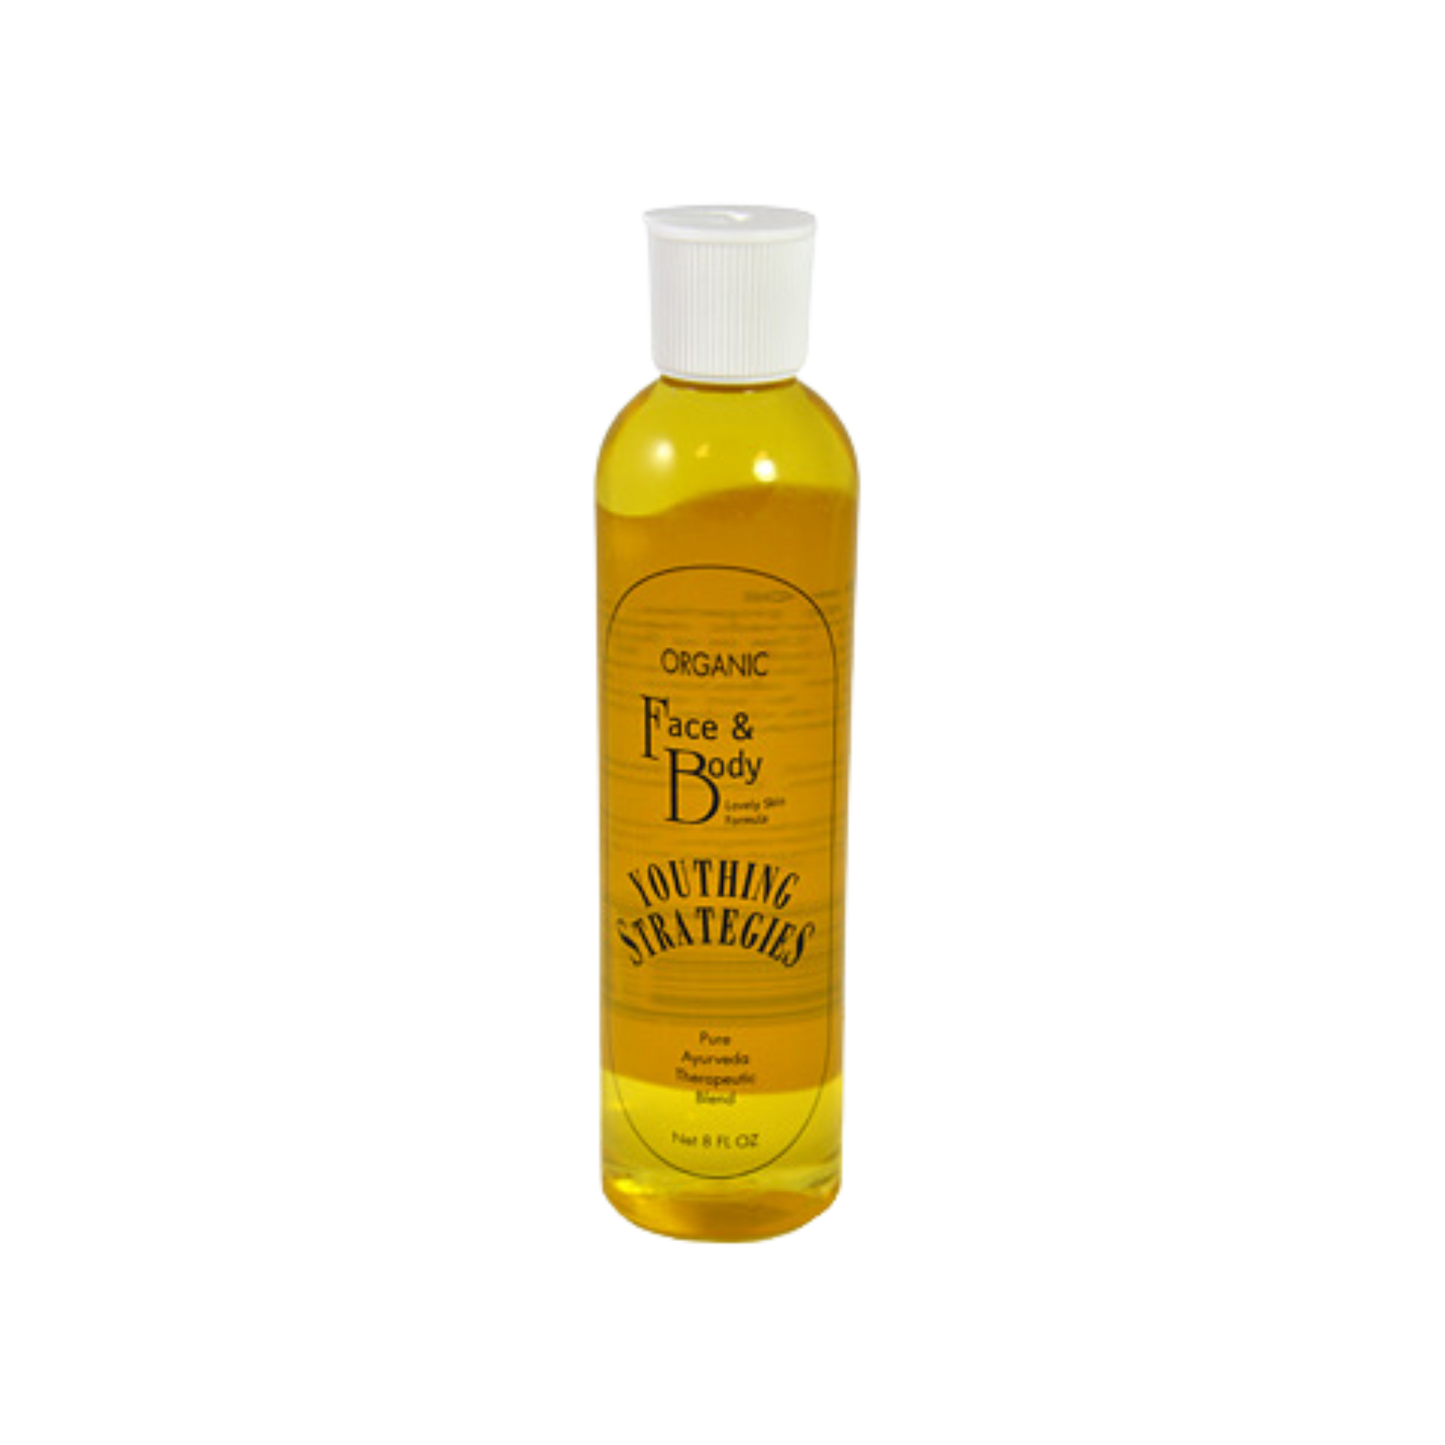 Youthing Strategies Face and Body Sesame Oil